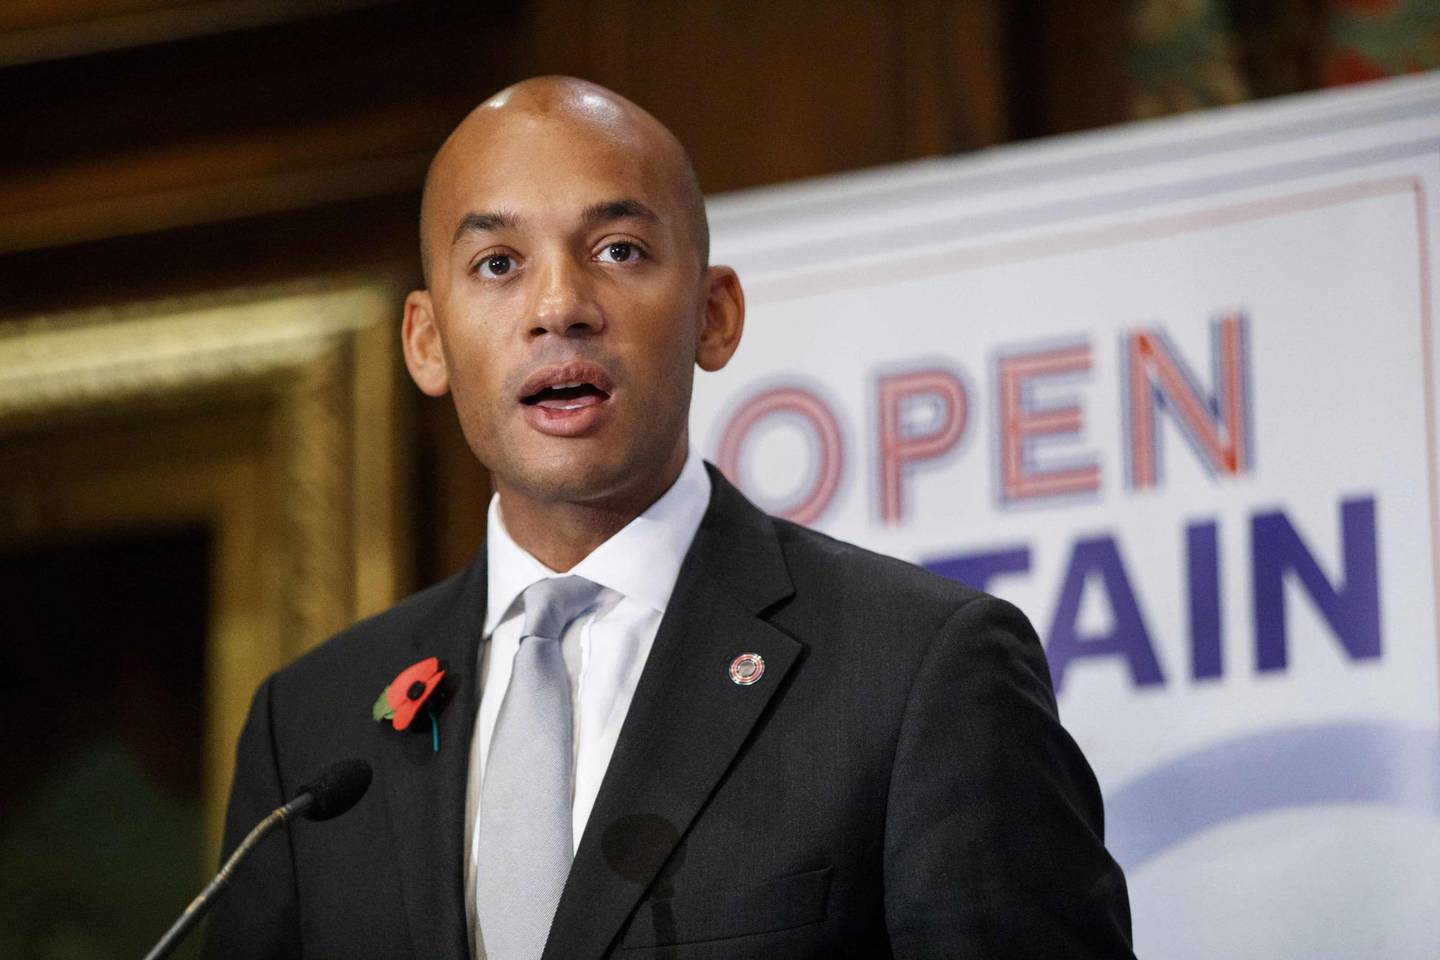 Labour MP Chuka Umunna introduces Britain's former ambassador to the EU and Article 50 author, John Kerr, prior to his speech at an event hosted by the pro-EU Open Britain, in central London on November 10, 2017.
The former British ambassador to the European Union who helped author Article 50, the EU's legal mechanism for withdrawal, insisted on November 10, that the process can still be reversed. / AFP PHOTO / Tolga AKMEN